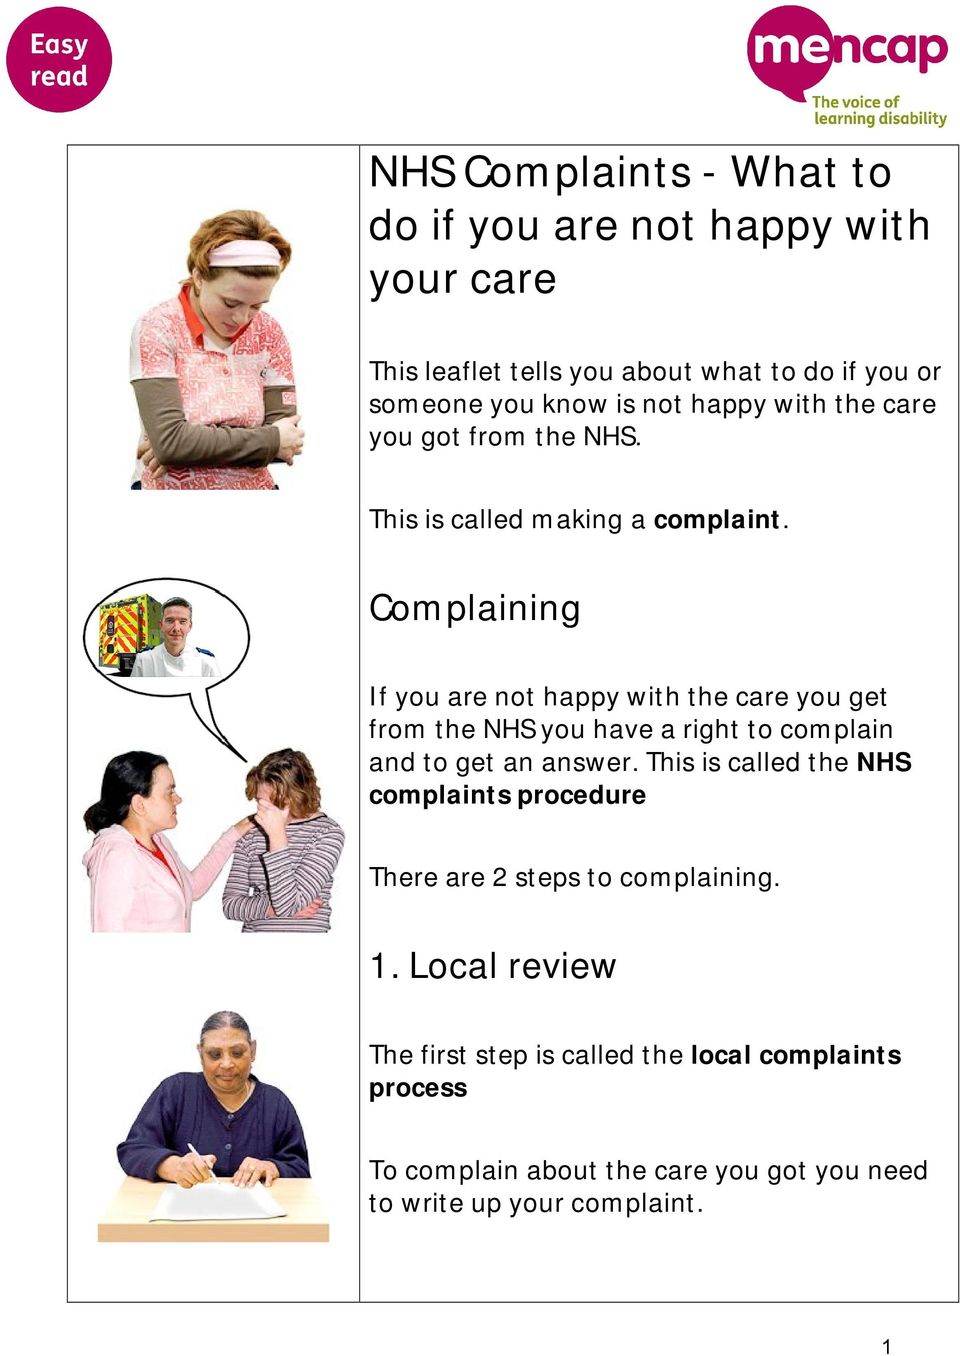 Complaining If you are not happy with the care you get from the NHS you have a right to complain and to get an answer.